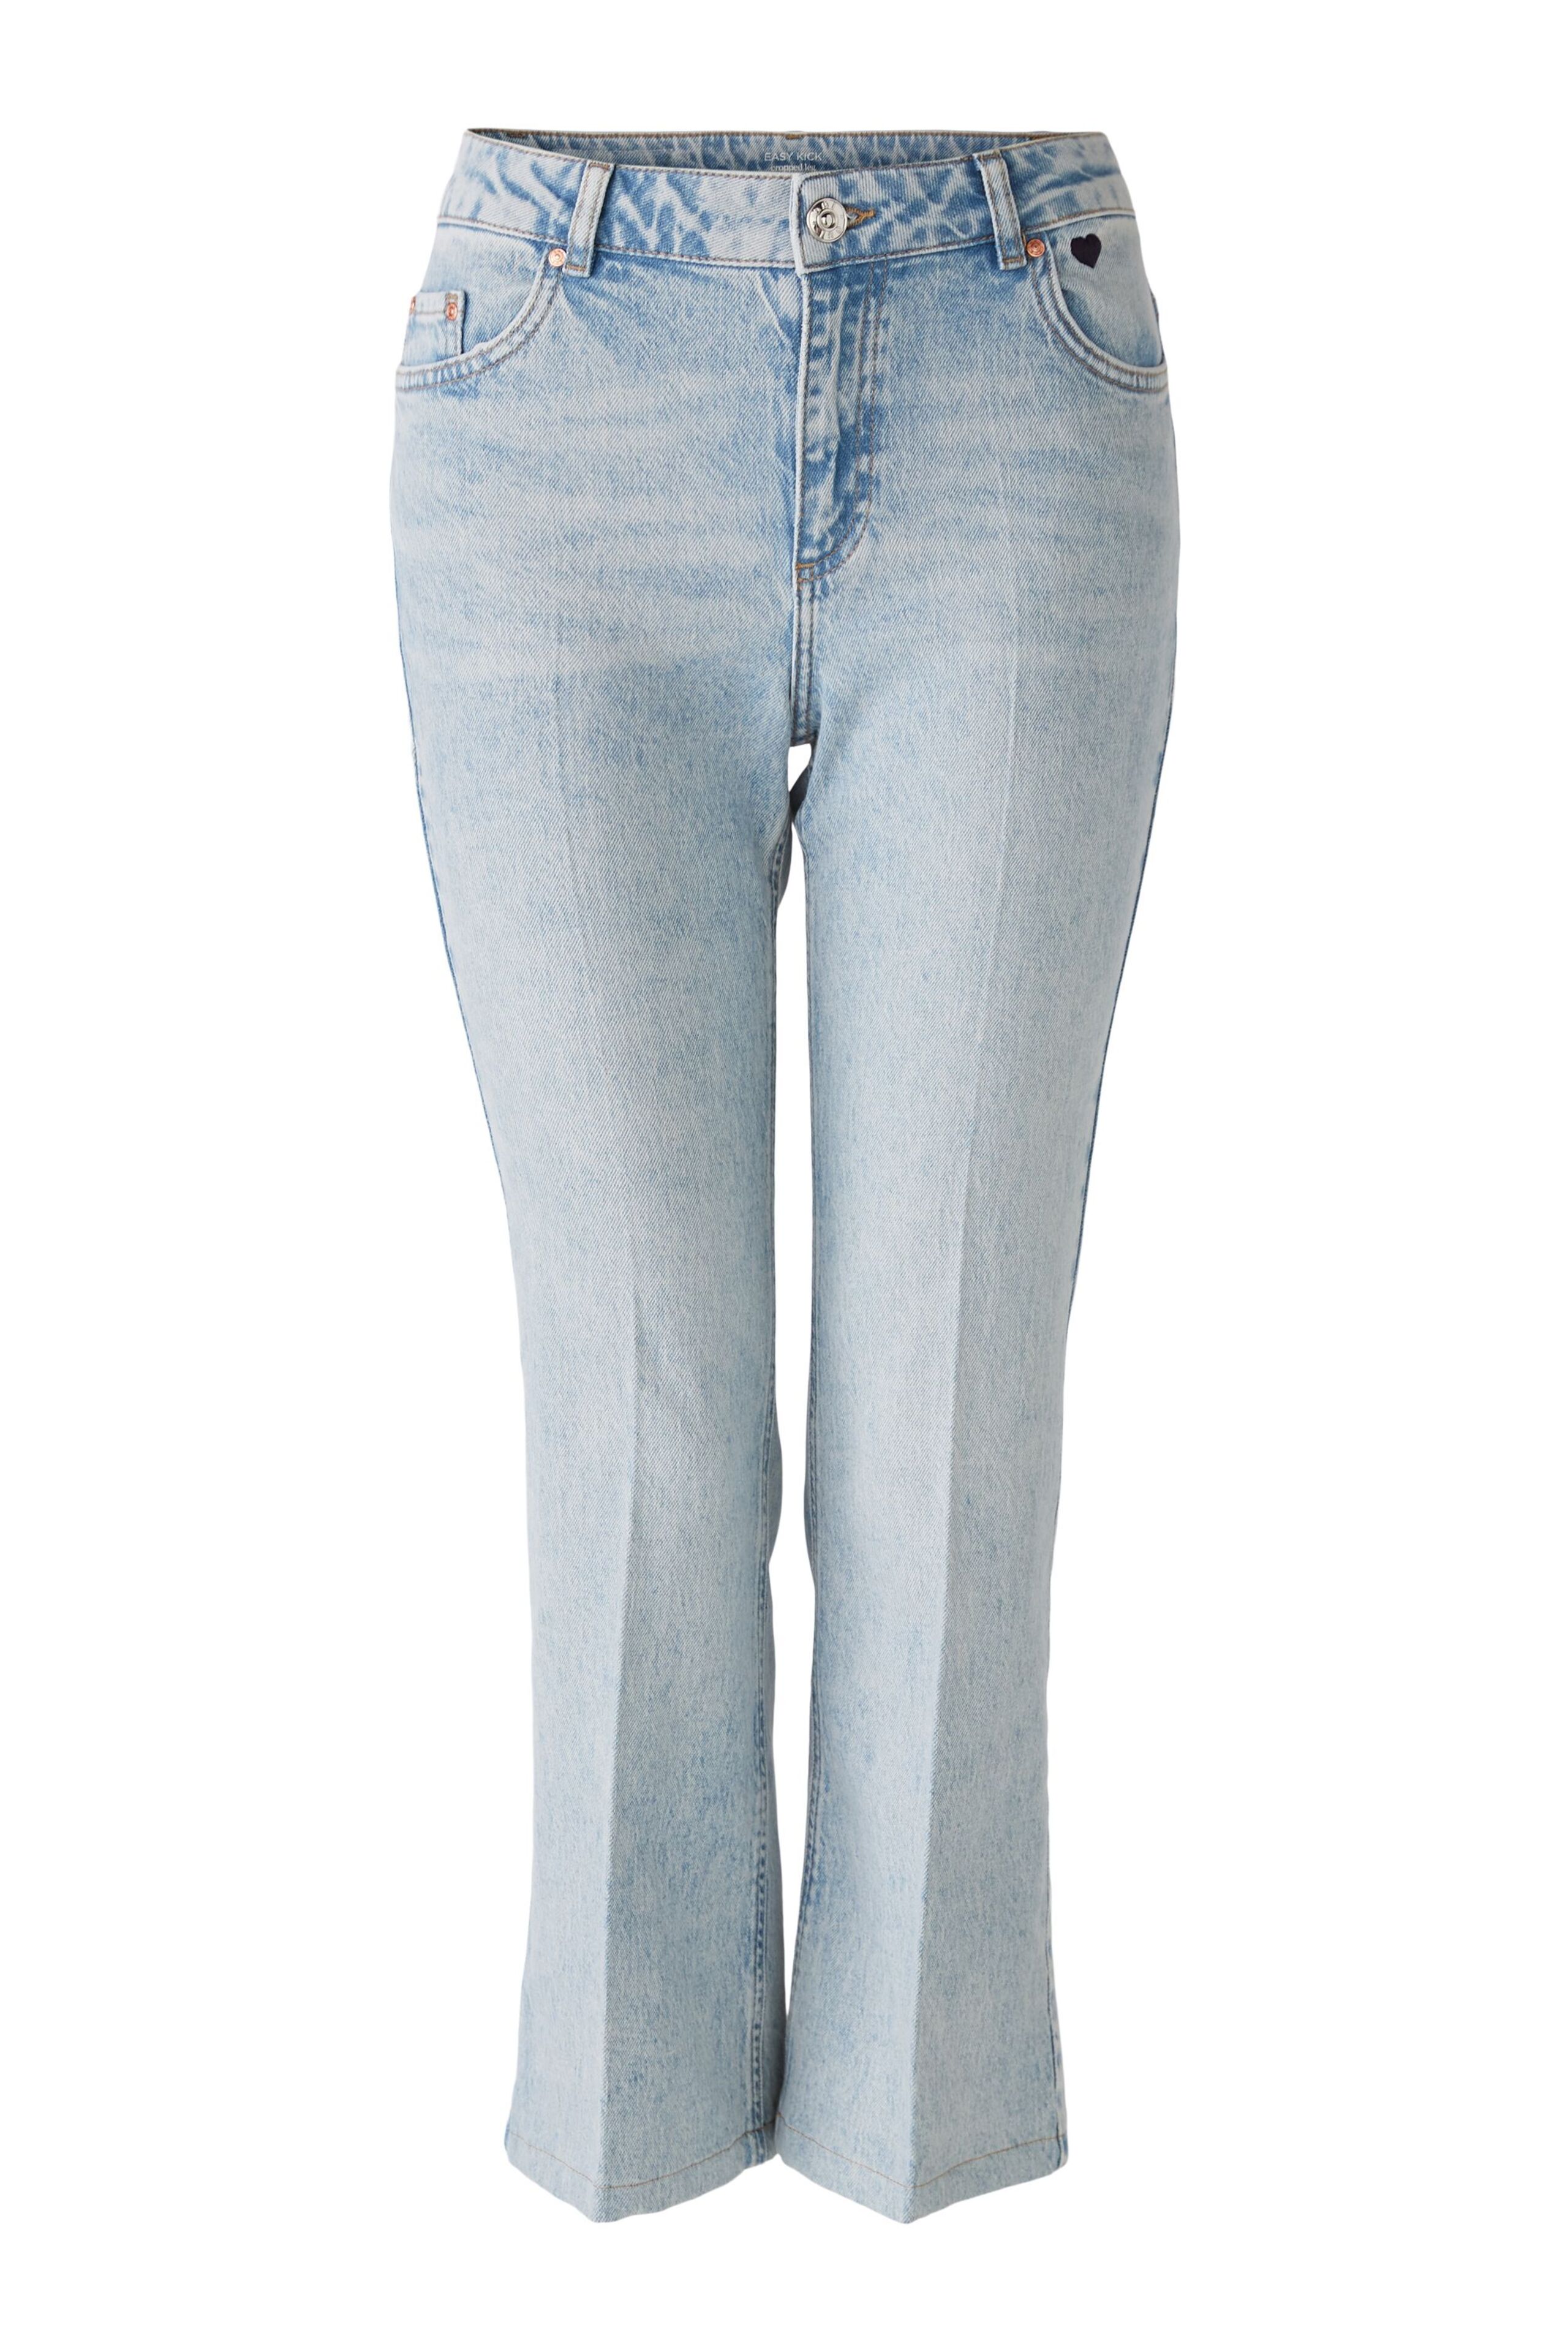 Jeans EASY KICK mid waist, cropped